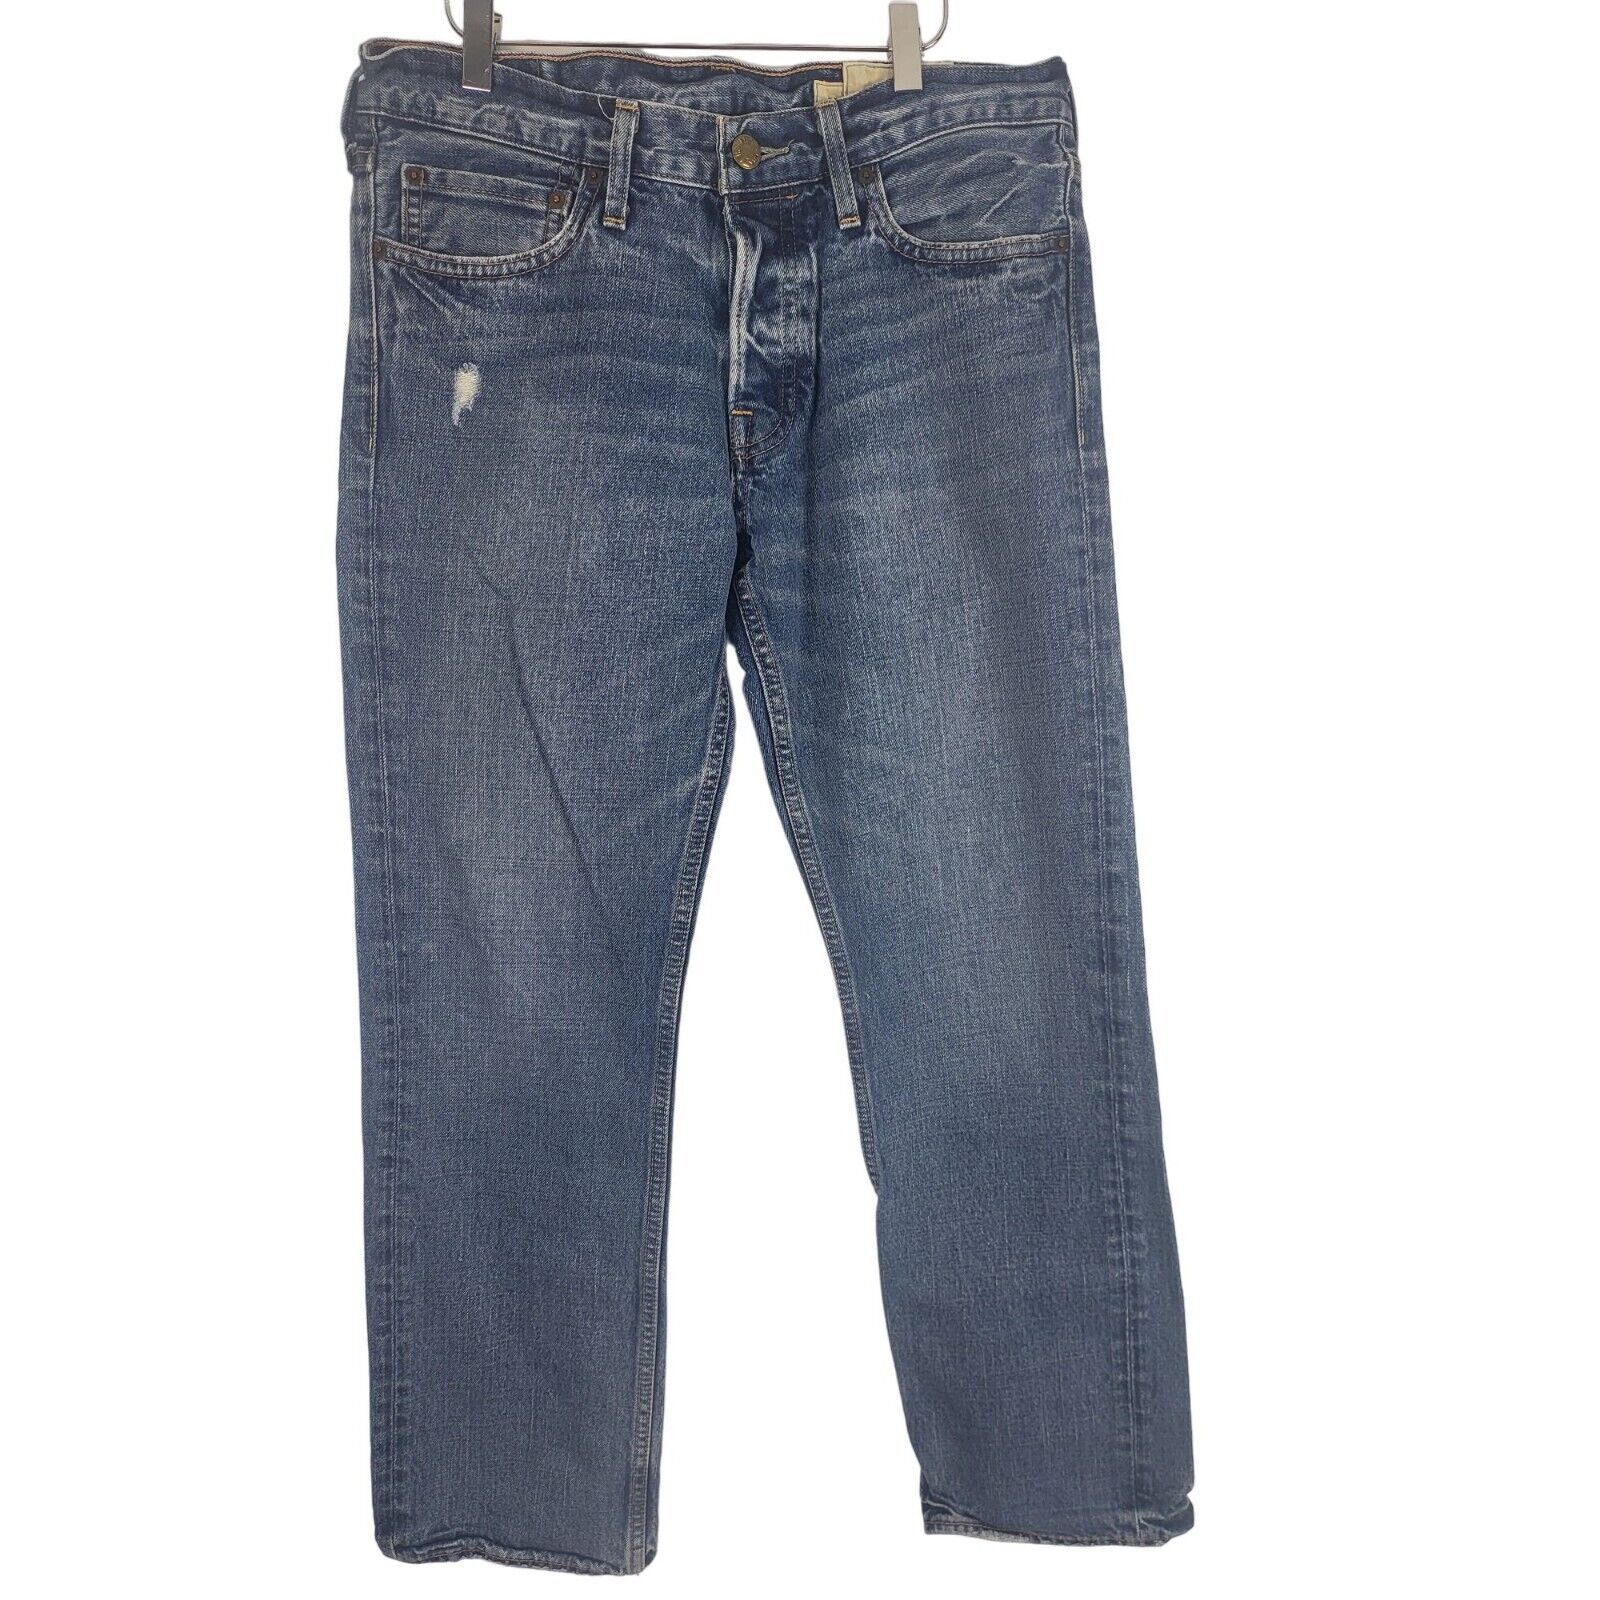 Primary image for Hollister Button Fly Jeans 32x32 Mens High Rise Distressed Straight Leg Blue